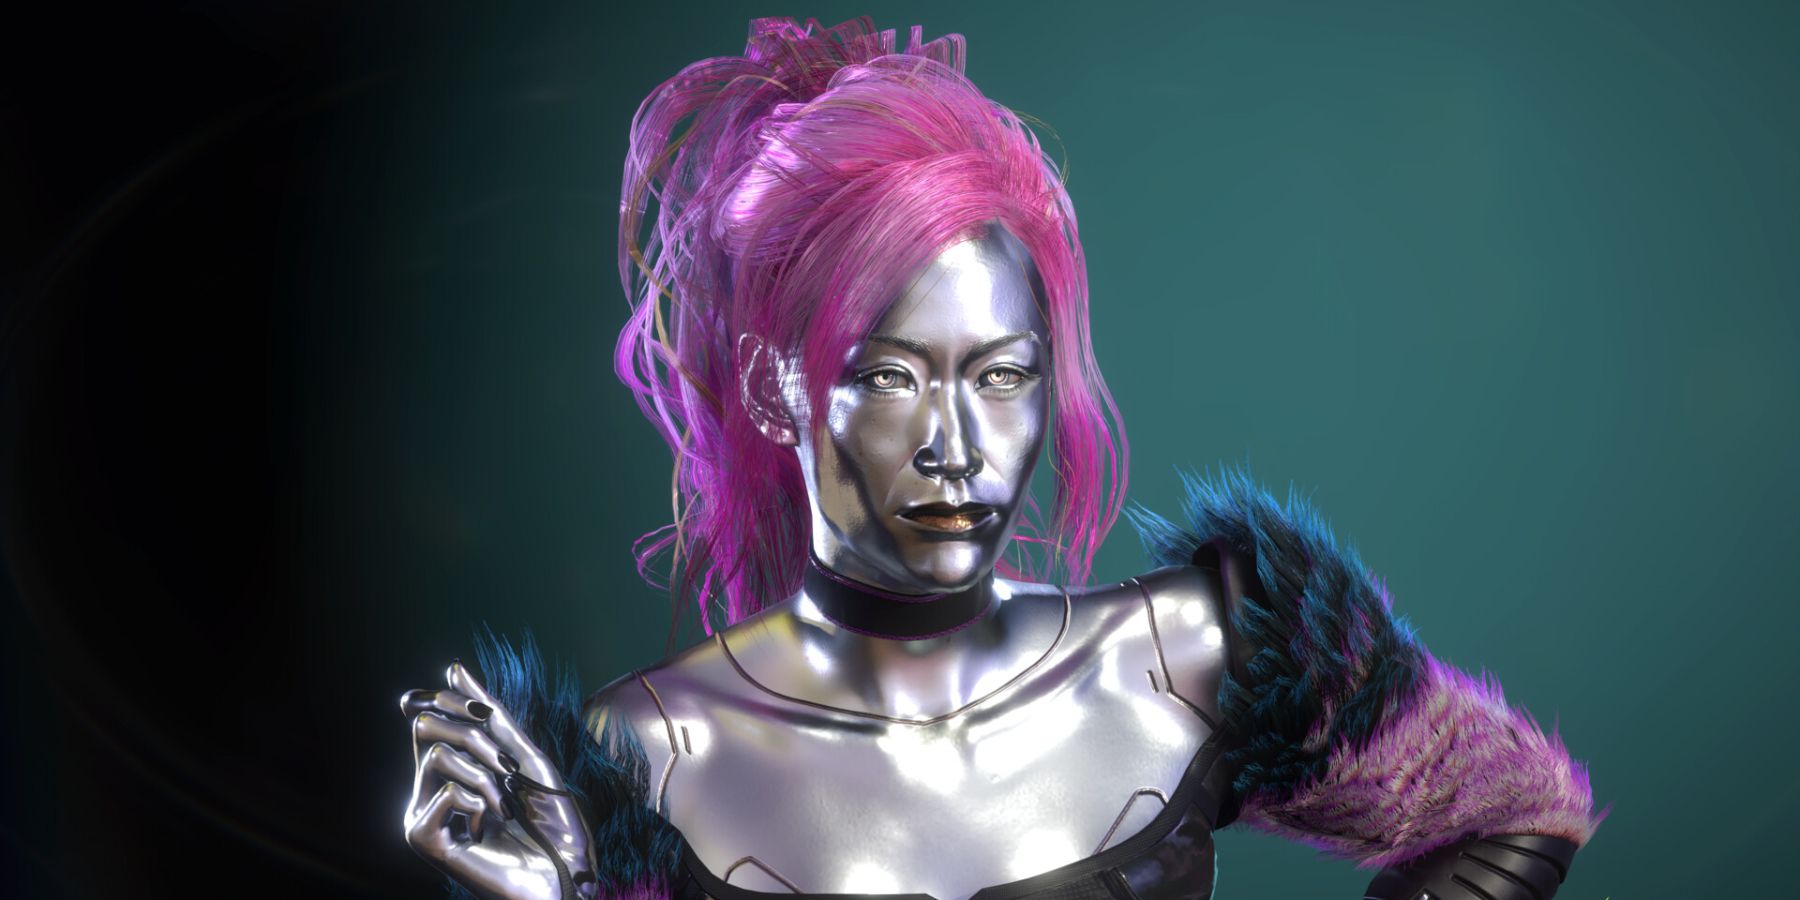 Concept art of Cyberpunk 2077's Lizzy Wizzy, holding her hand up in a sassy pose.